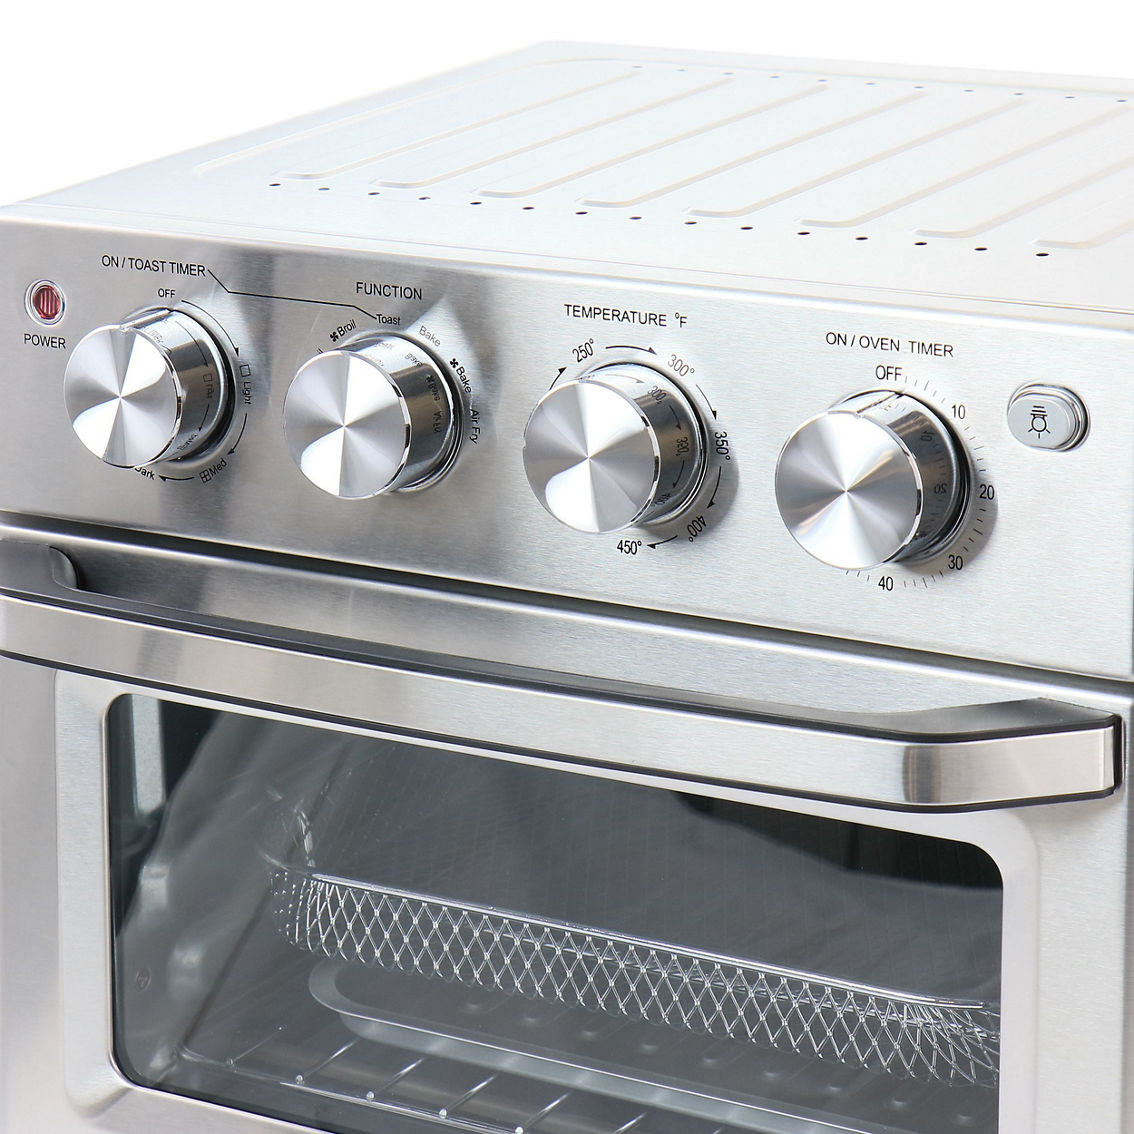 Better Chef Do-It-All 20 Liter Convection Air Fryer Toaster Broiler Oven in Silv - Image 5 of 5